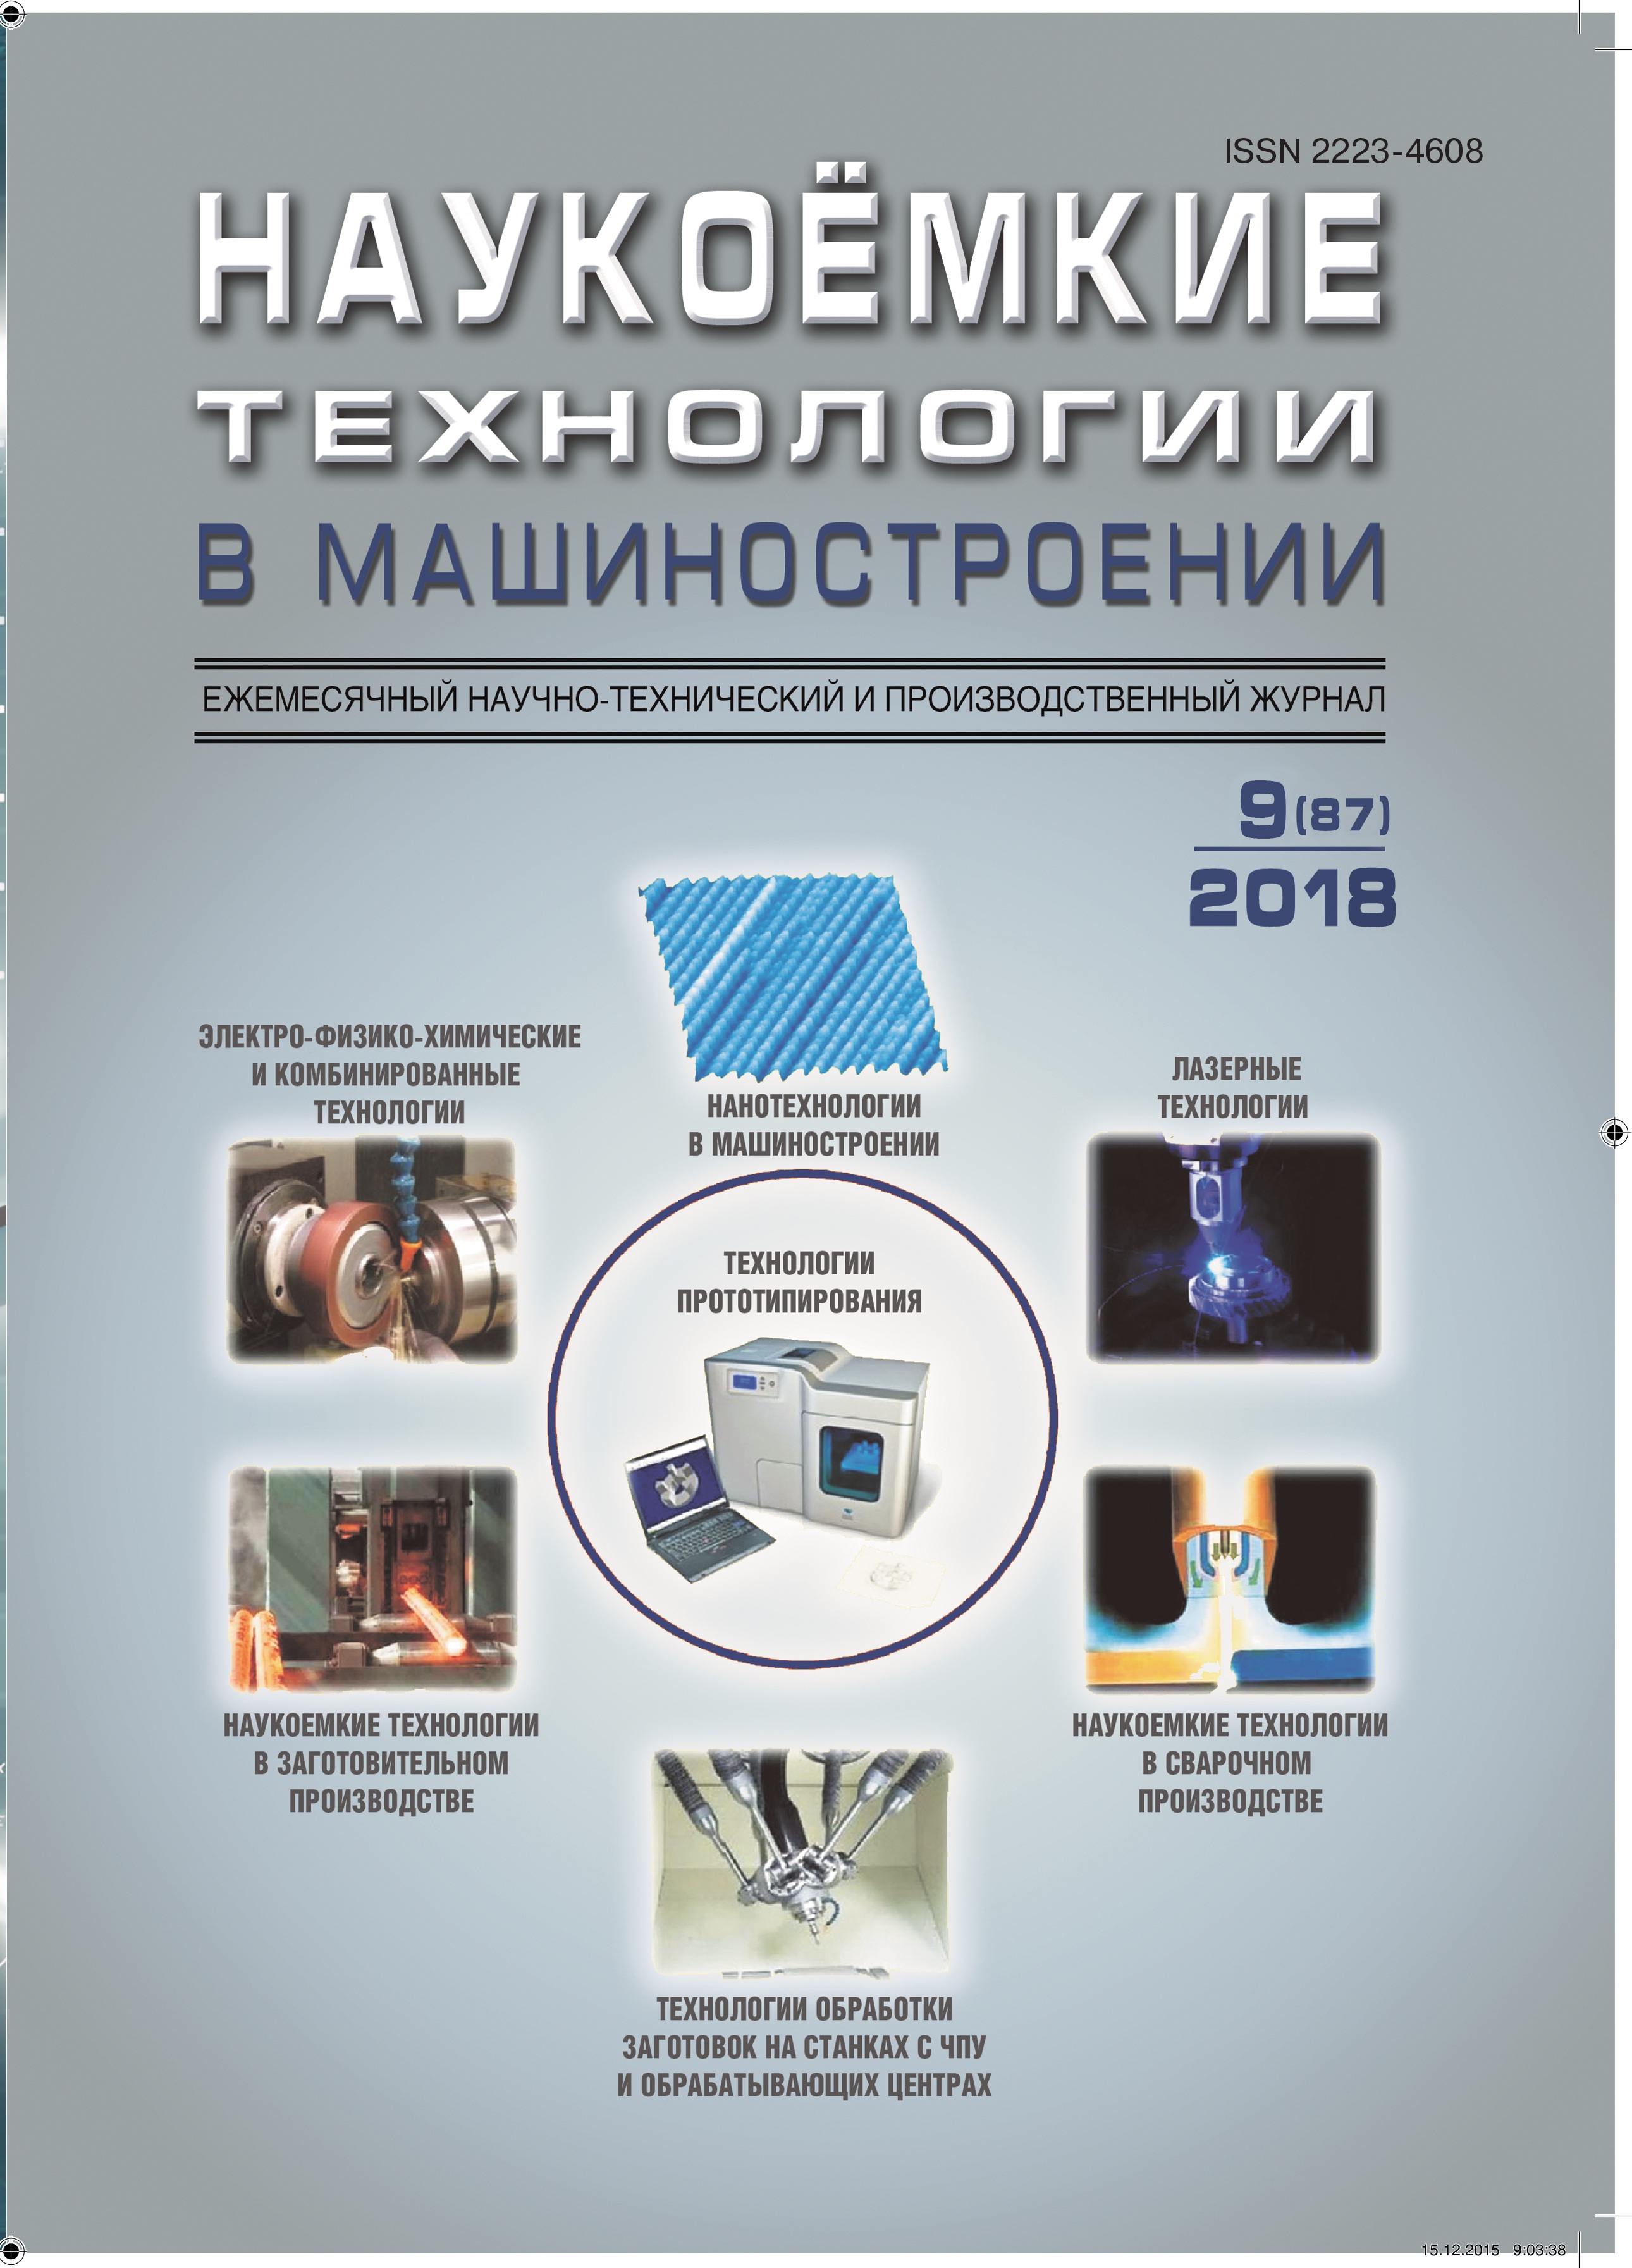                         Technological preparation science intensive improvement  in multiproduct production
            